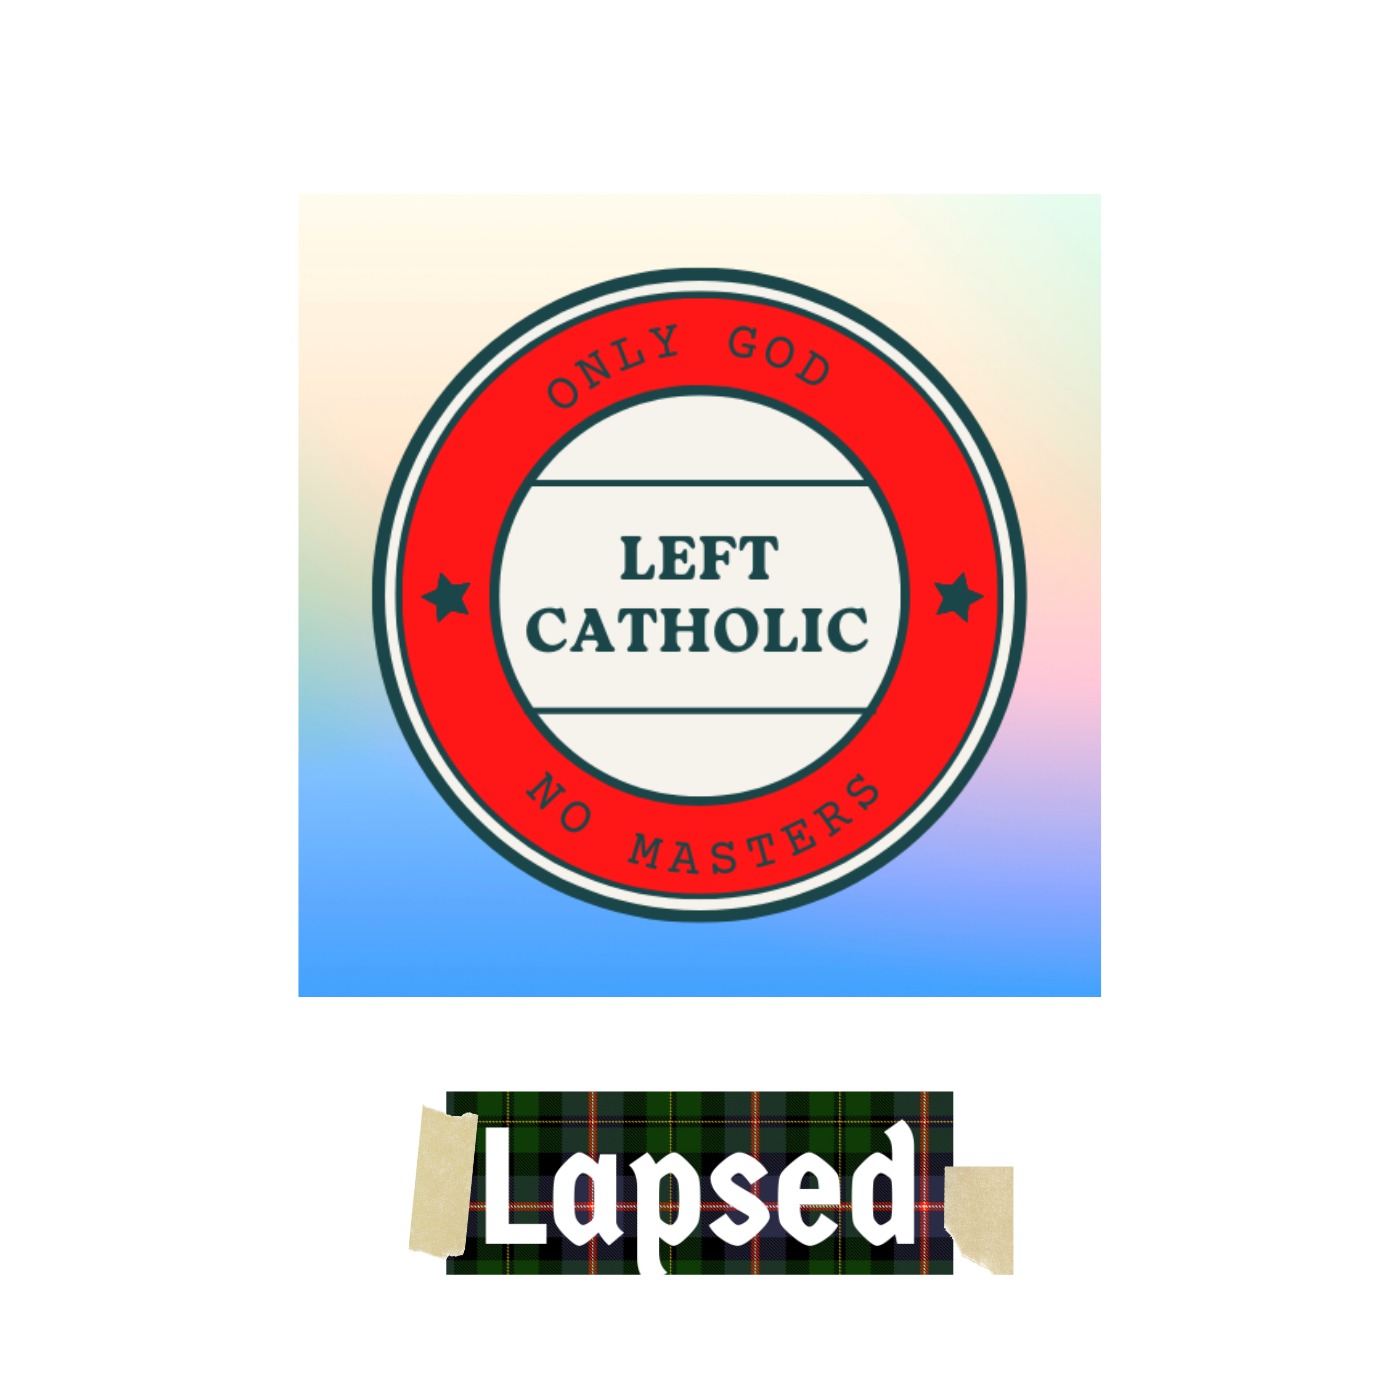 An Interview with Abby Rampone of Left Catholic